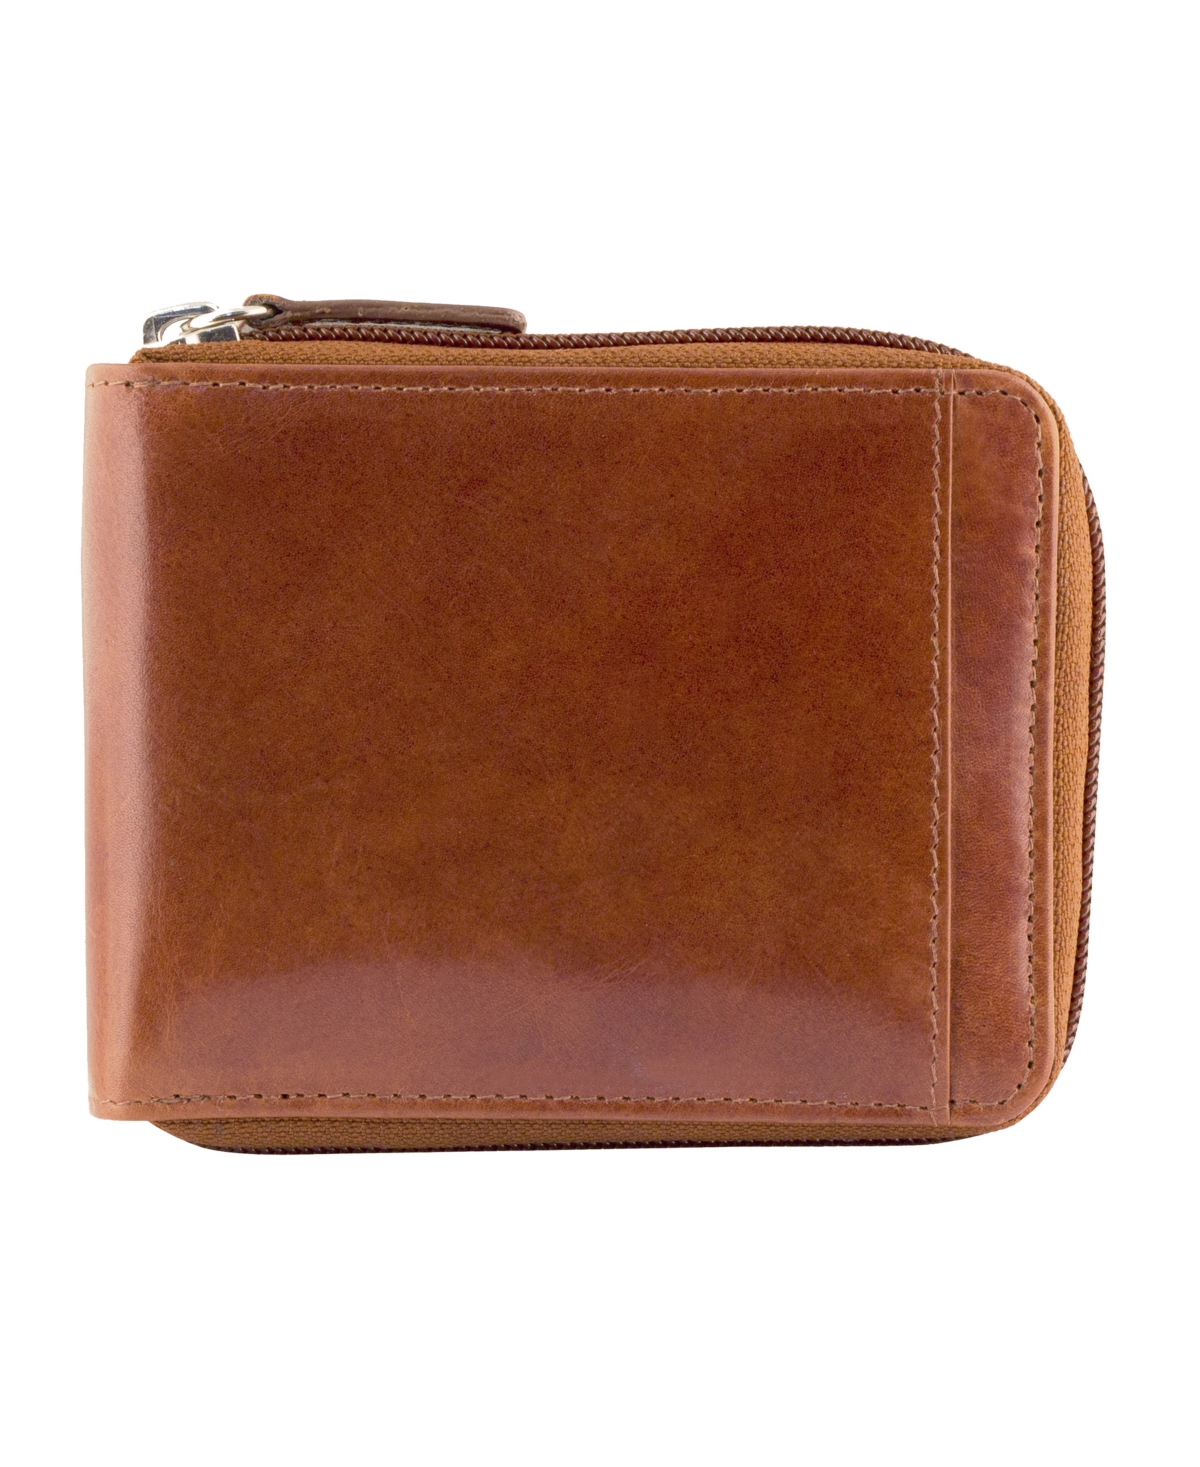 Mancini Casablanca Collection Men's Rfid Secure Center Zippered Wallet with Removable Passcase